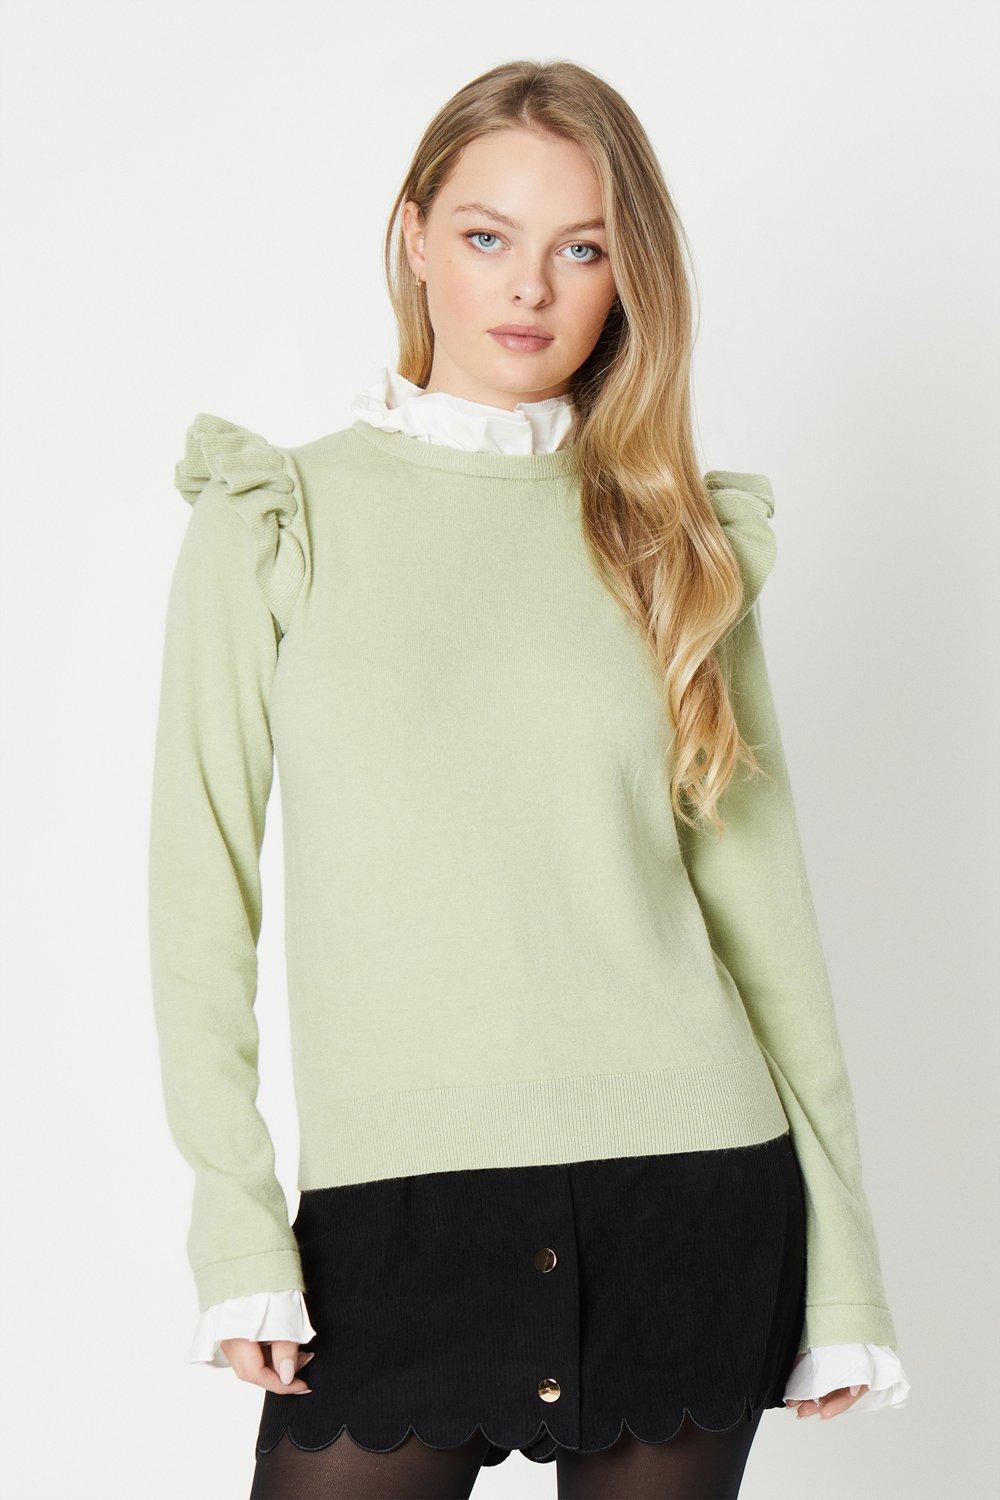 Ruffle Shoulder Jumper With Frill Neck & Cuffsage